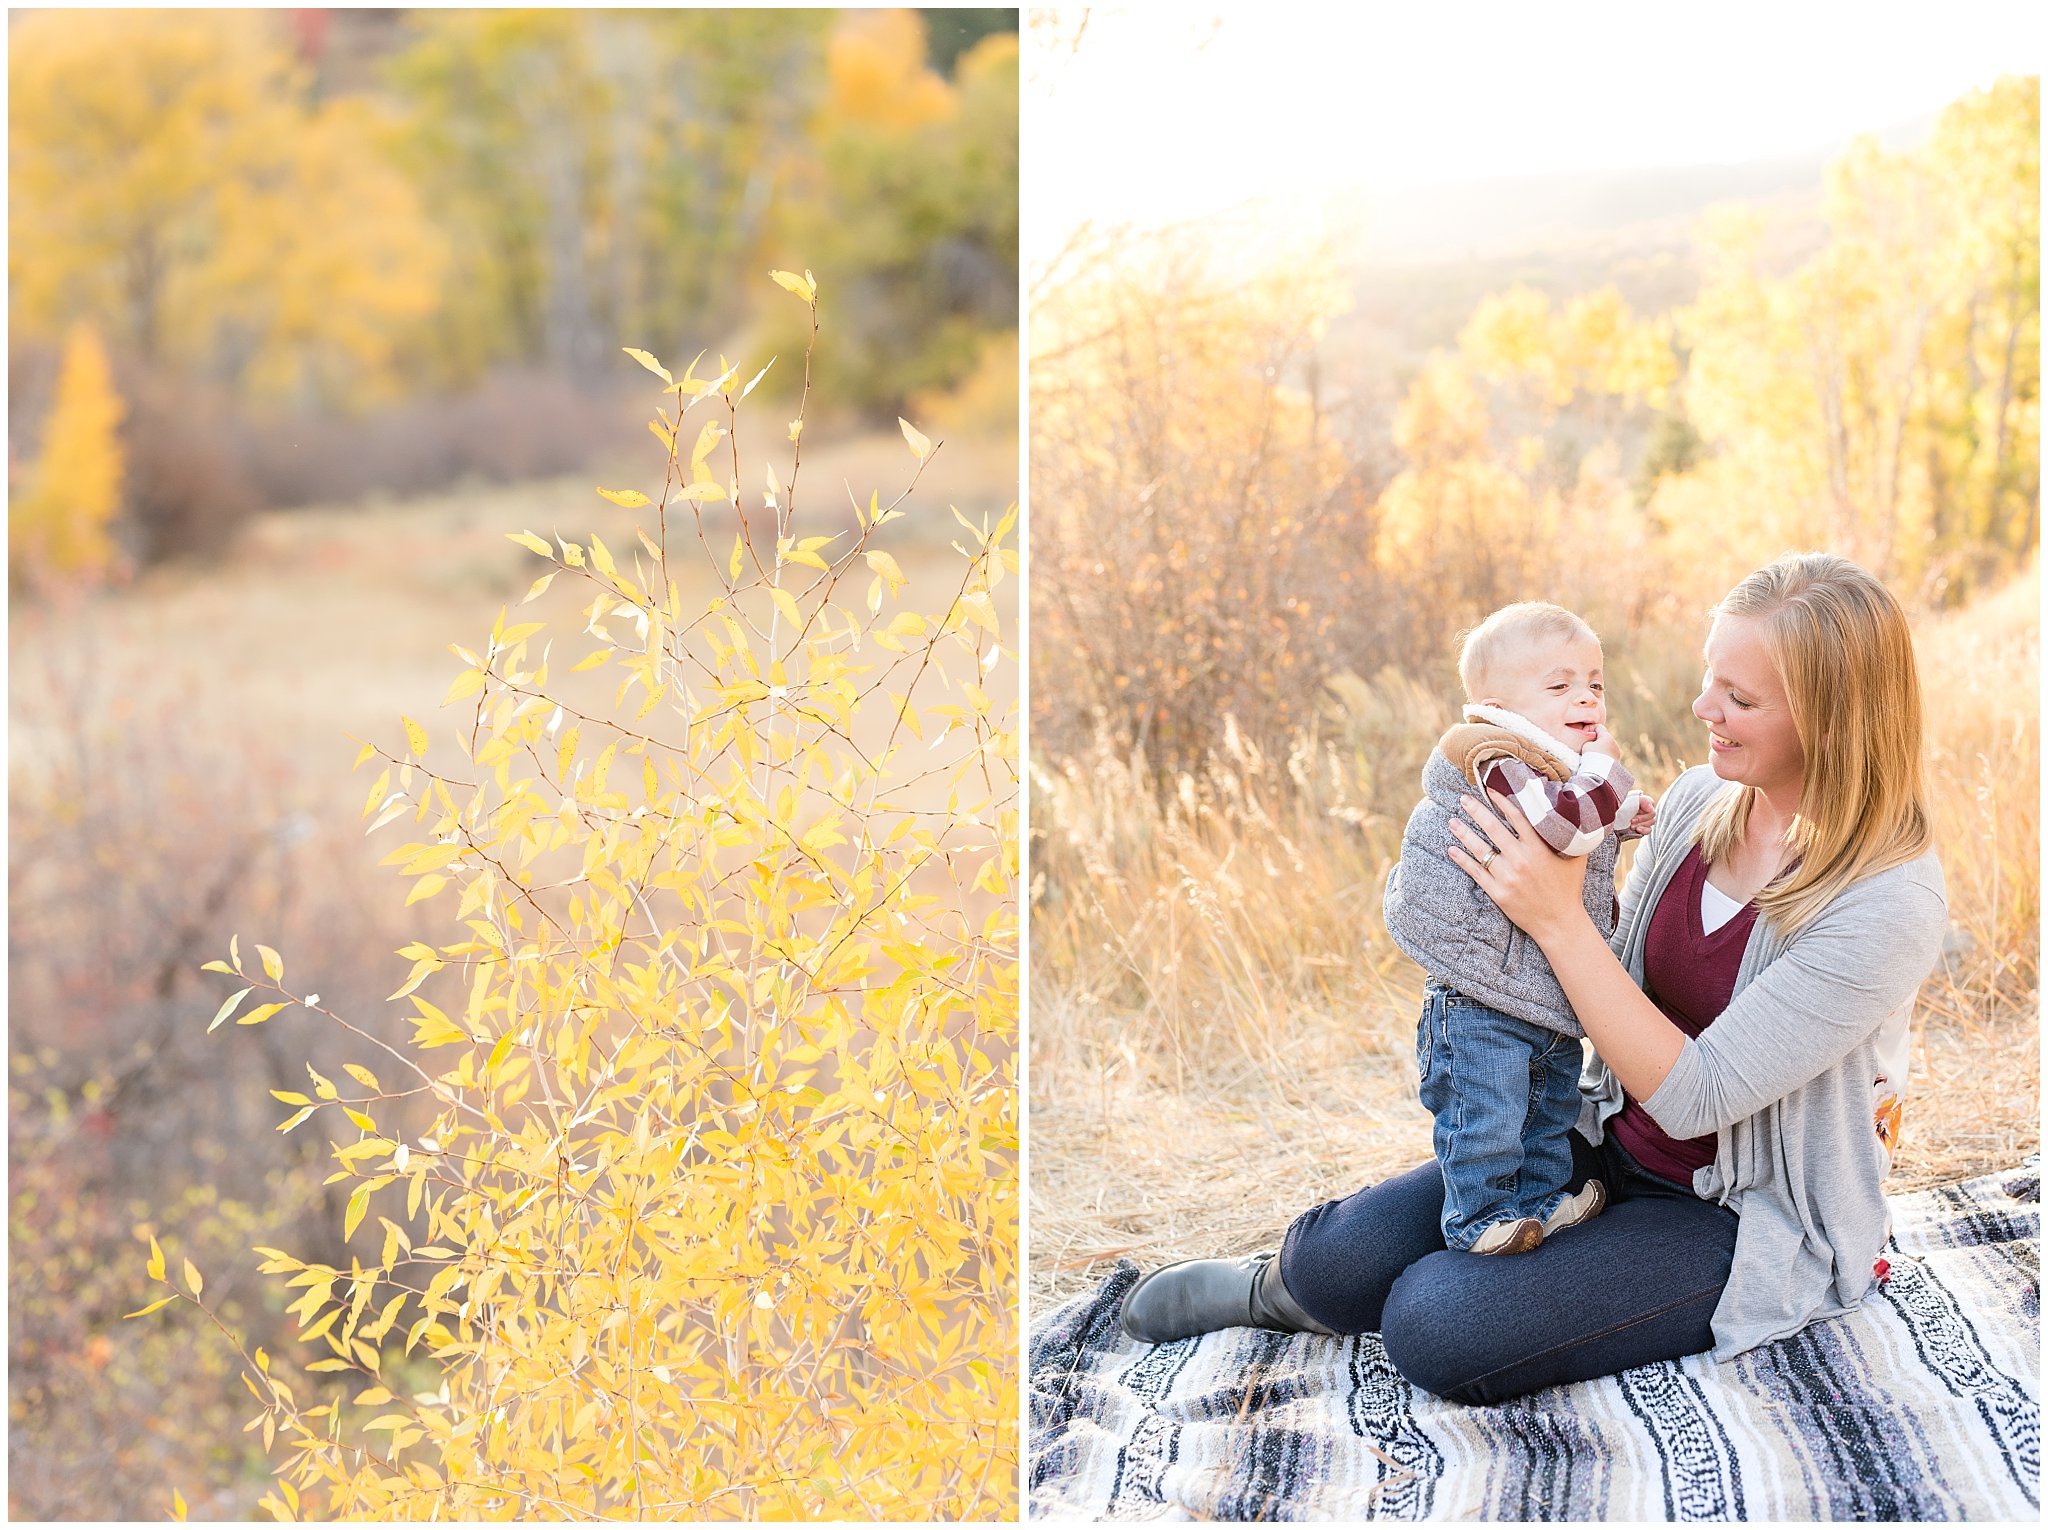 Mom and infant candid portrait in the leaves | Fall family photo session at Snowbasin | Snowbasin Resort | Jessie and Dallin Photography